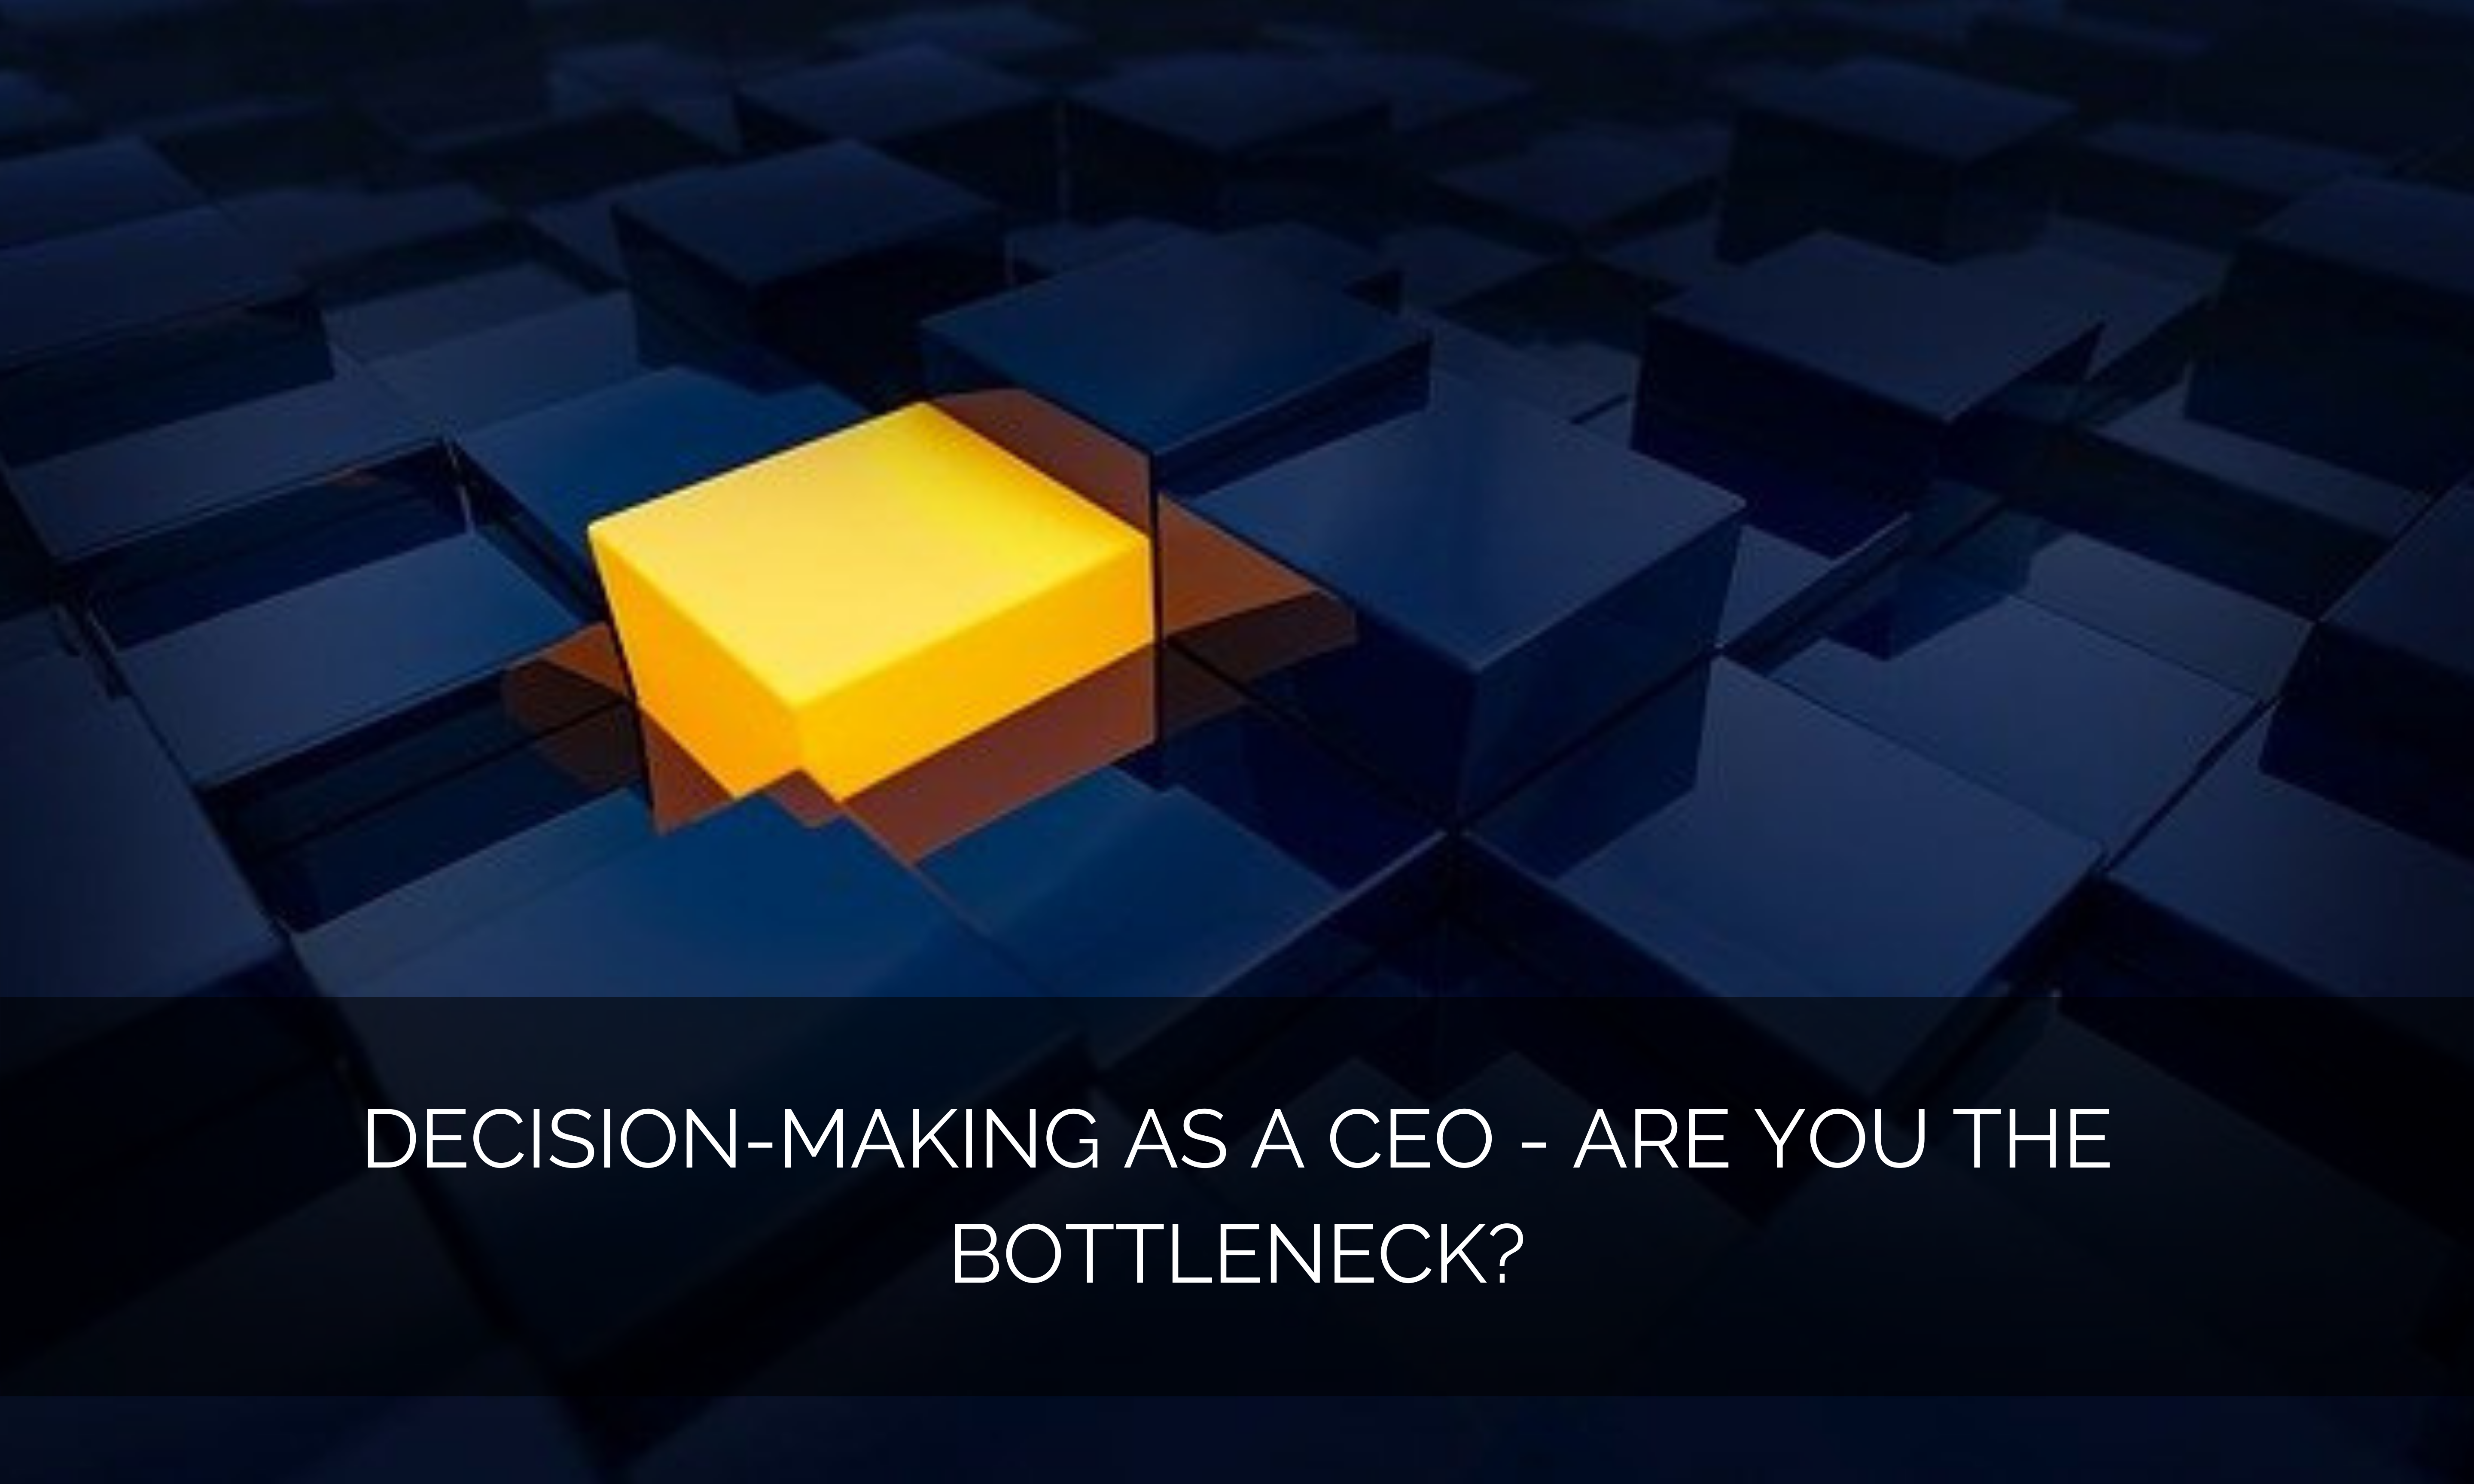 Decision-making as a CEO – are you the bottleneck?